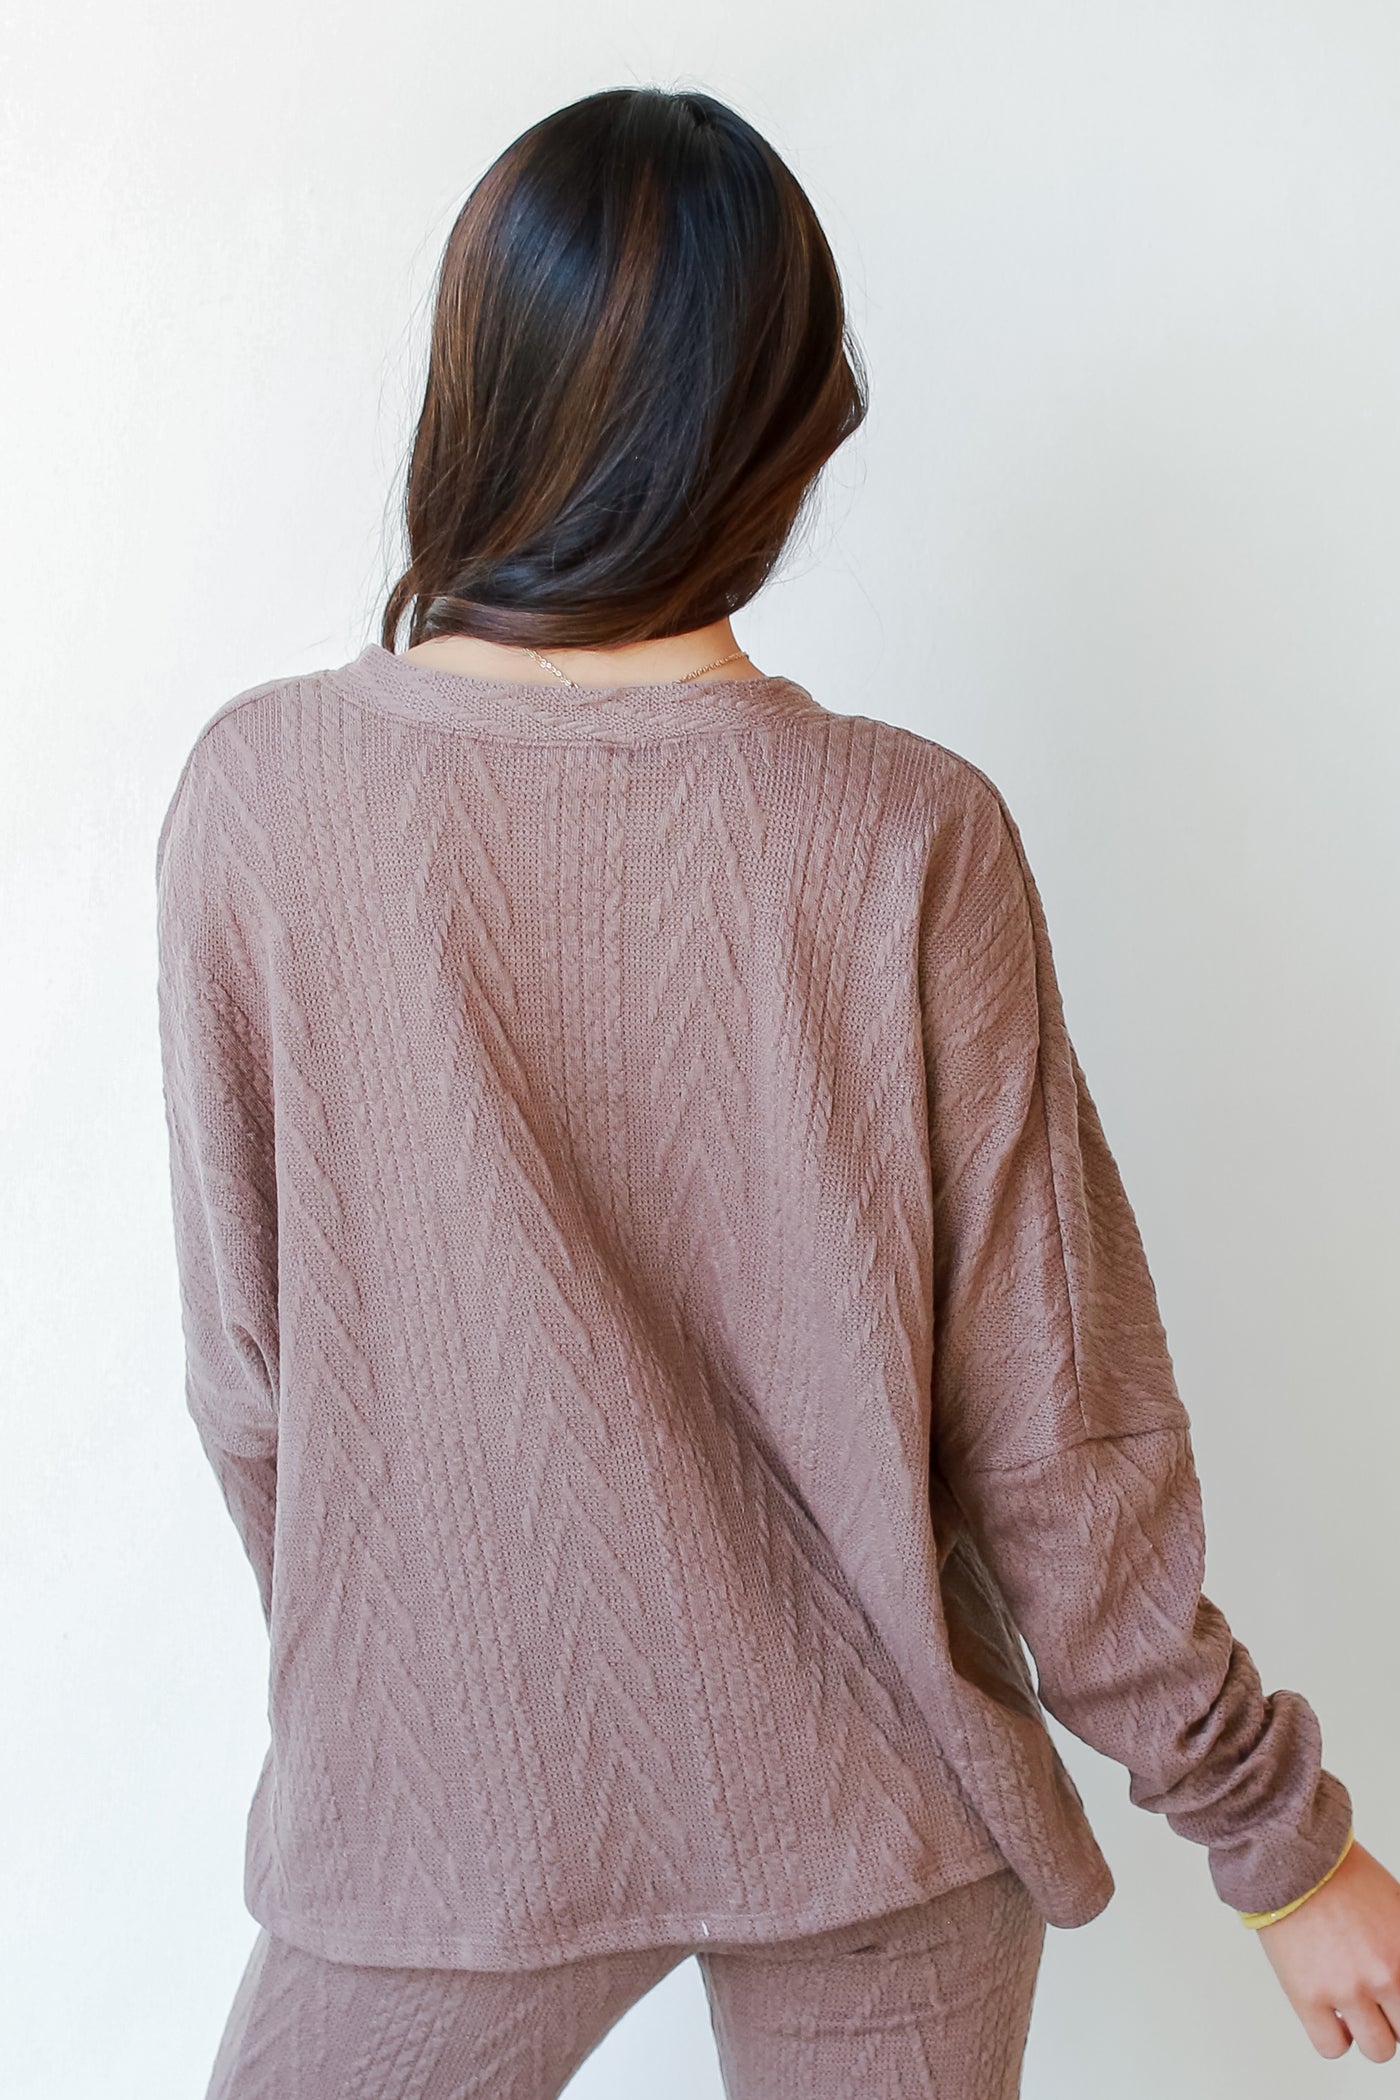 Cable Knit Cardigan in mocha back view